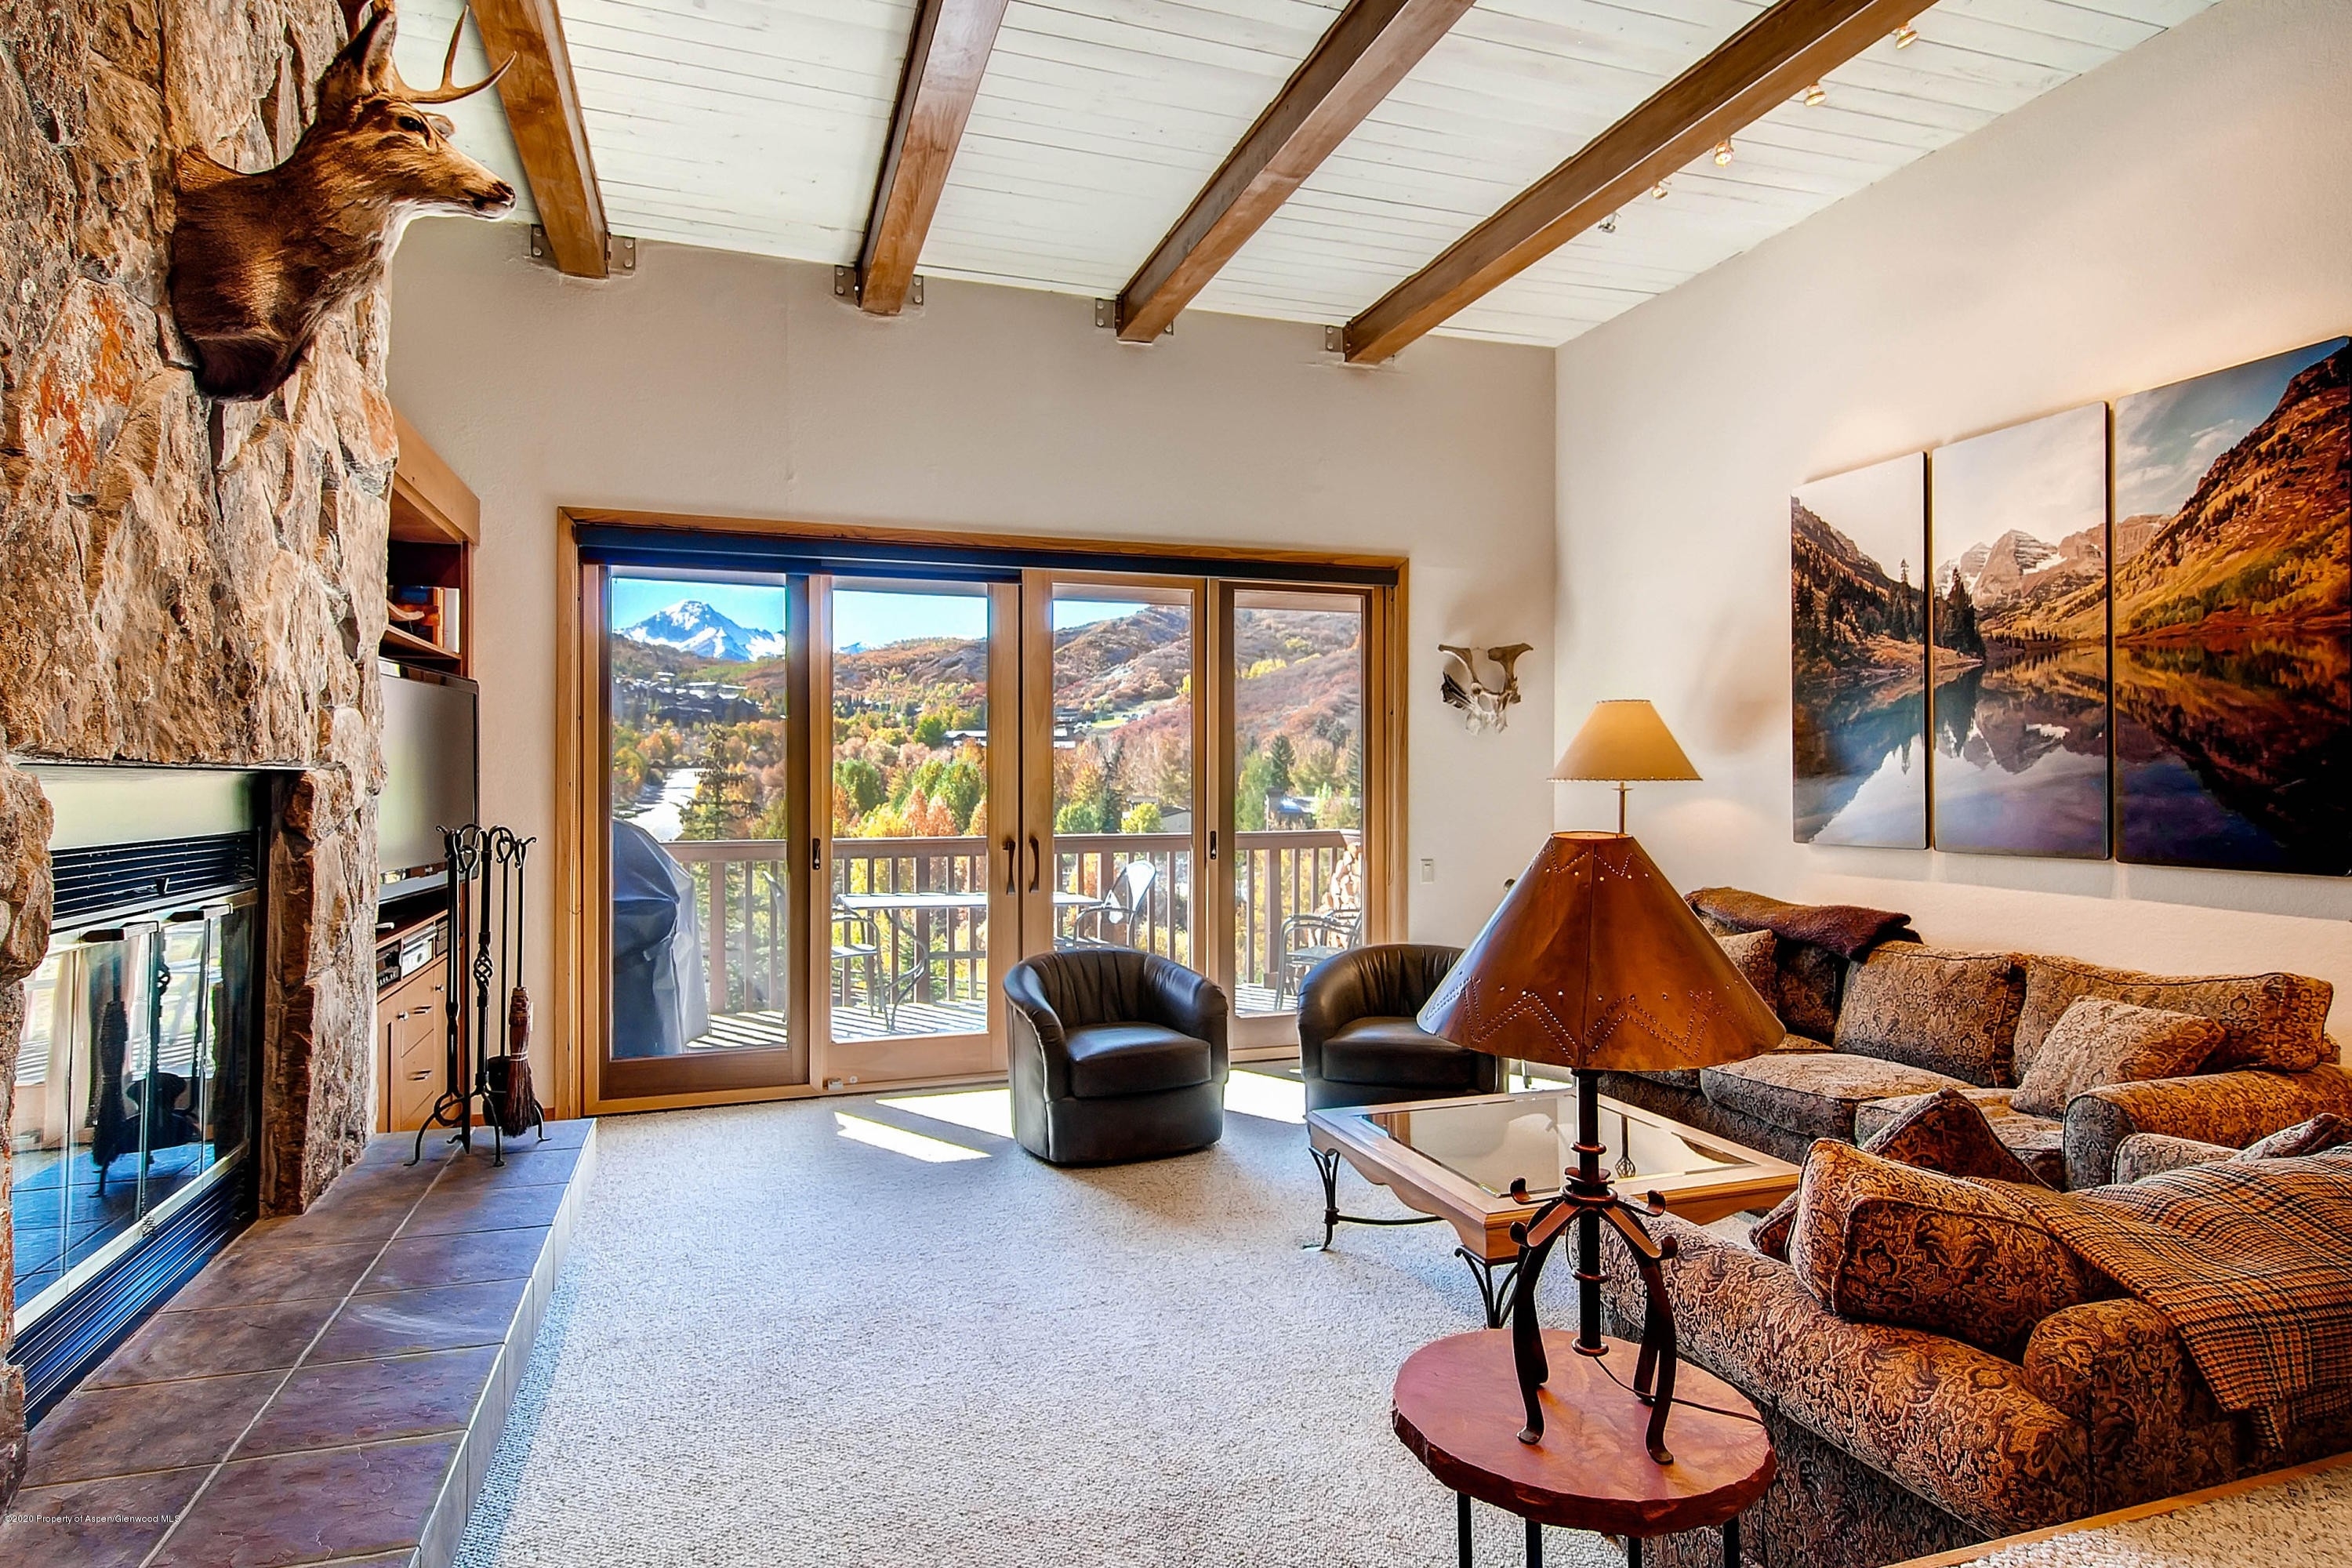 Property at 229 Faraway Road, 34 Snowmass Village, CO 81615